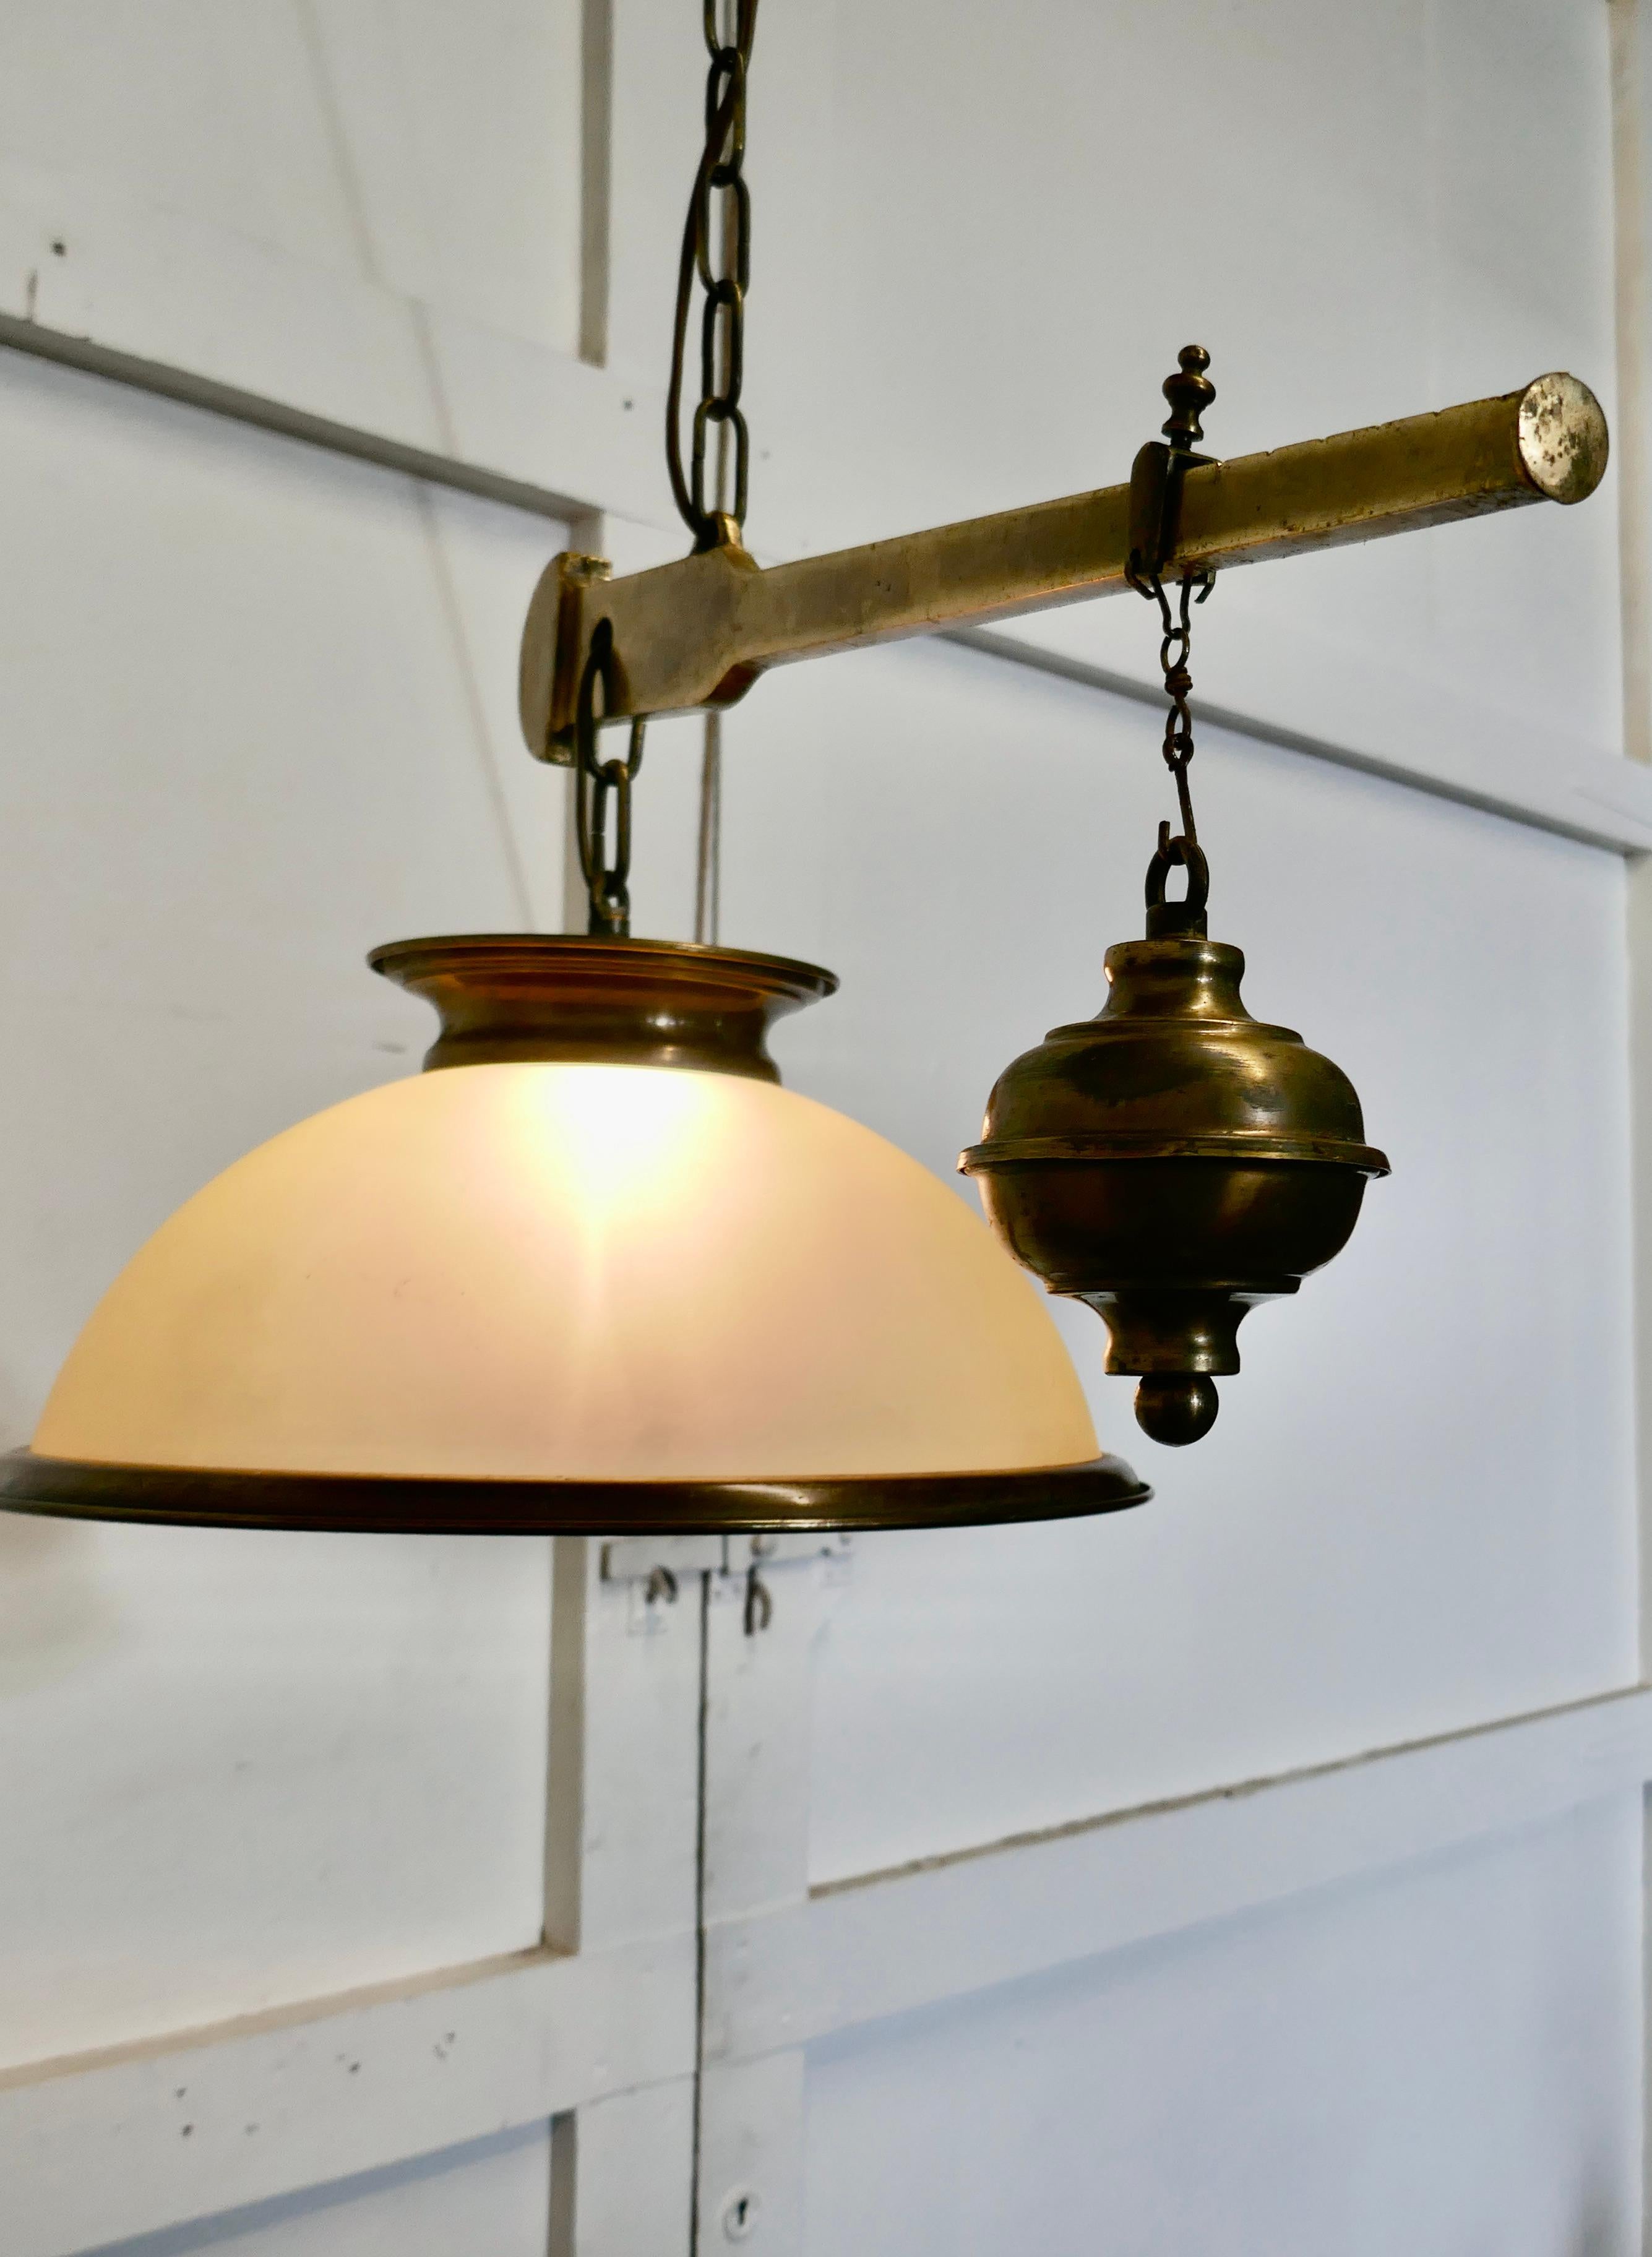 A large steelyard brass scale lamp from a Hardware Store

A very good quality lamp probably from a hardware store it has been made from a brass steelyard bar scale complete with weight and chains and a brass plaque from Louisiana, a river well